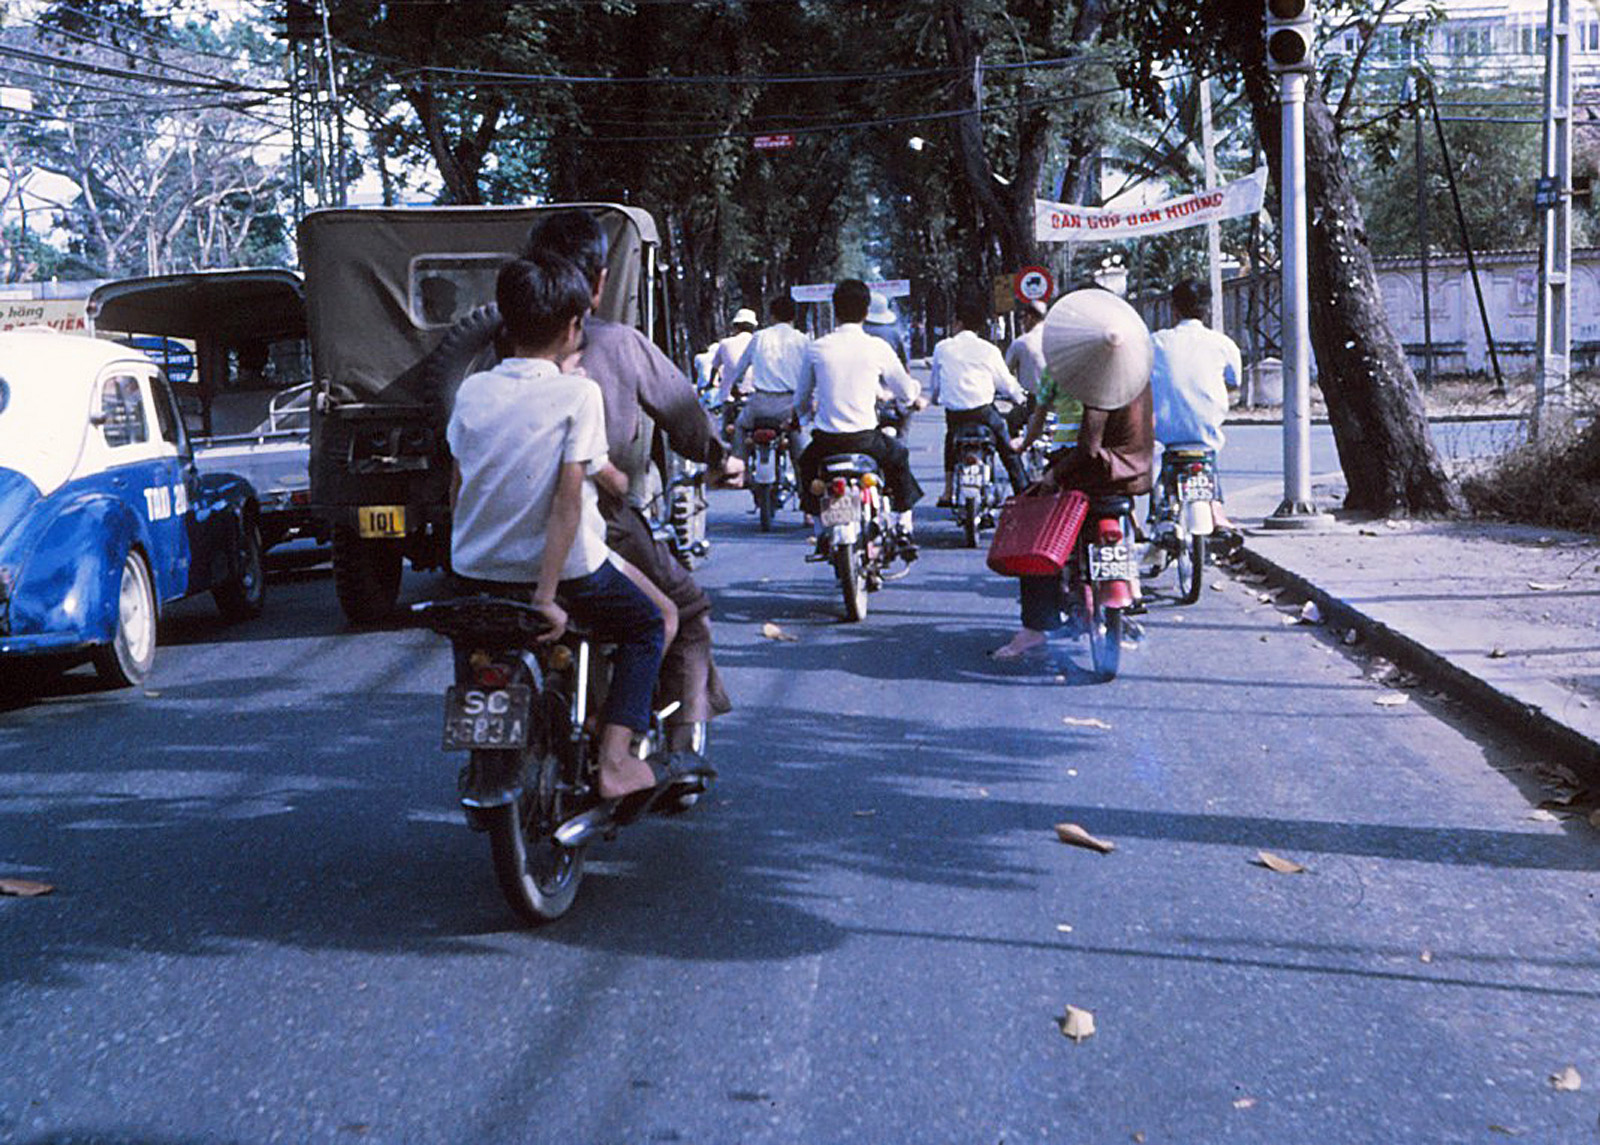 a group of people on motorcycles going down a street